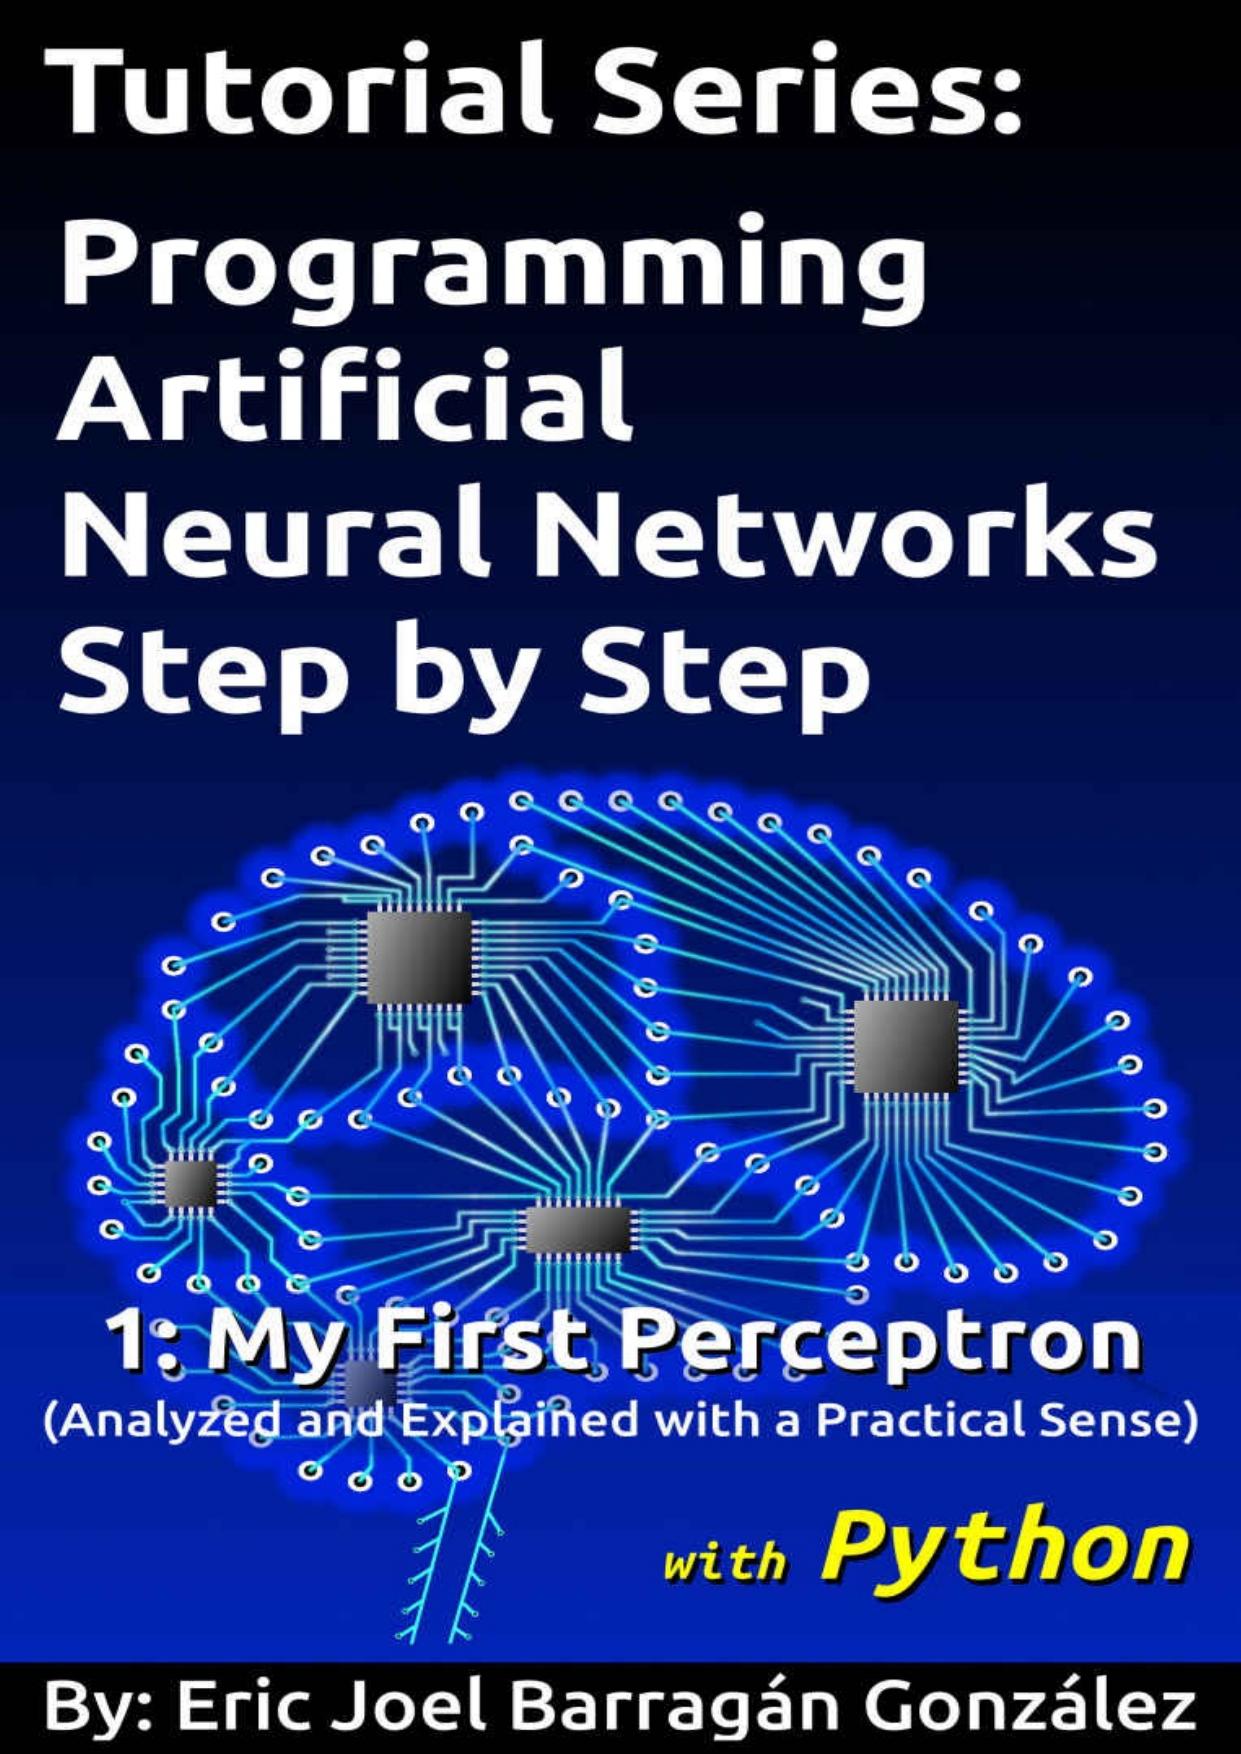 1: My First Perceptron with Python: Analyzed and Explained with a Practical Sense (Tutorial Series: Programming Artificial Neural Networks Step by Step with Python)